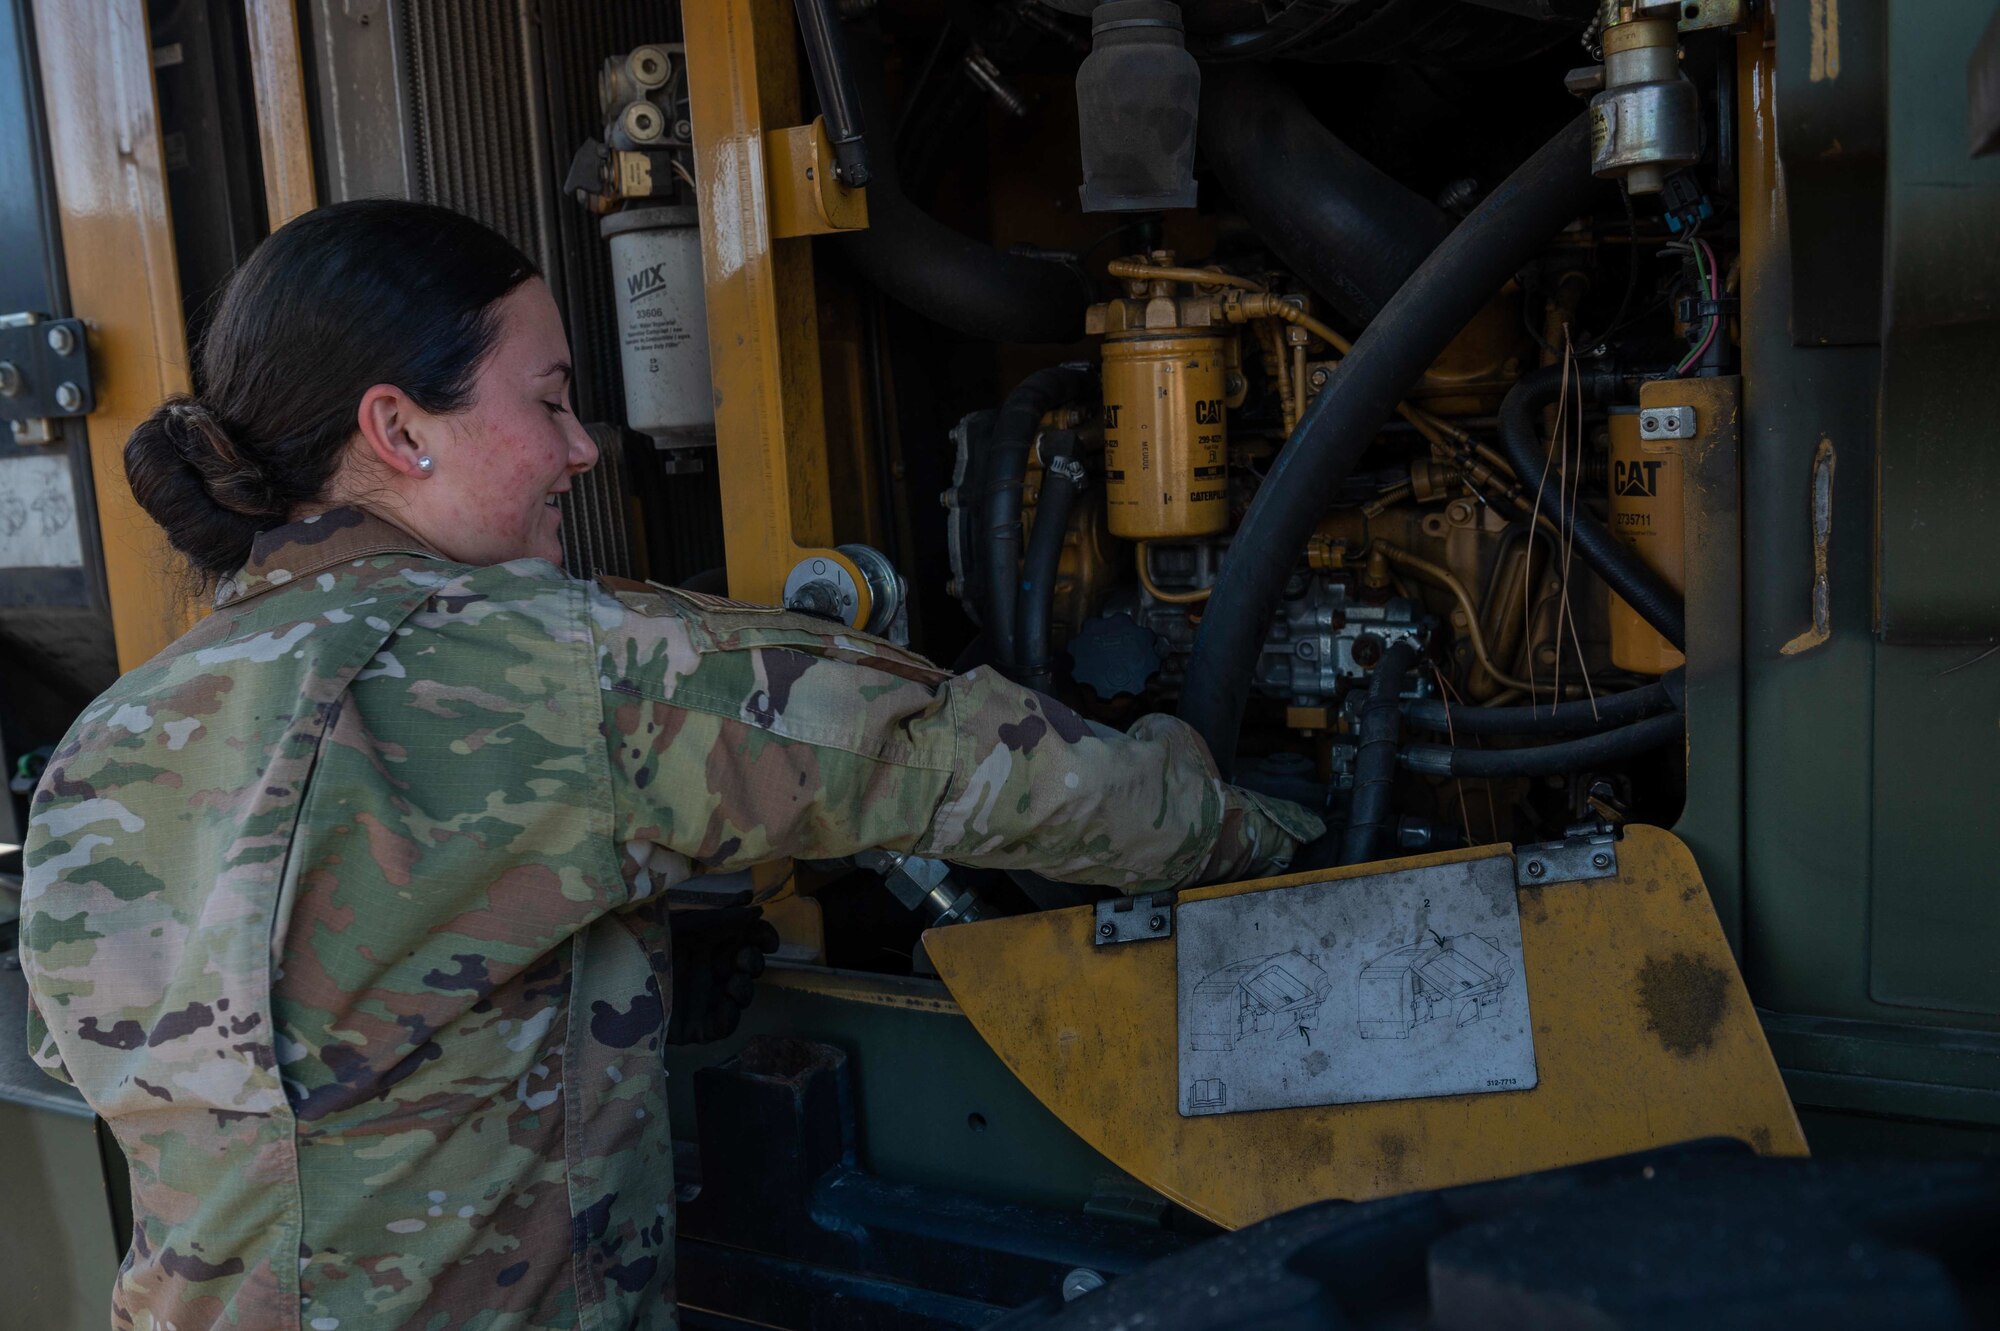 Airman Jasmine Cardin, 4th Logistics Readiness Squadron ground transportation vehicle operator, checks fuels on 10K All Terrain forklift at Seymour Johnson Air Force Base, North Carolina, Dec. 3, 2021. The squadron provides worldwide logistics support for the 4th Fighter Wing’s F-15E Strike Eagle aircraft and support units. (U.S. Air Force photo by Airman 1st Class Sabrina Fuller)